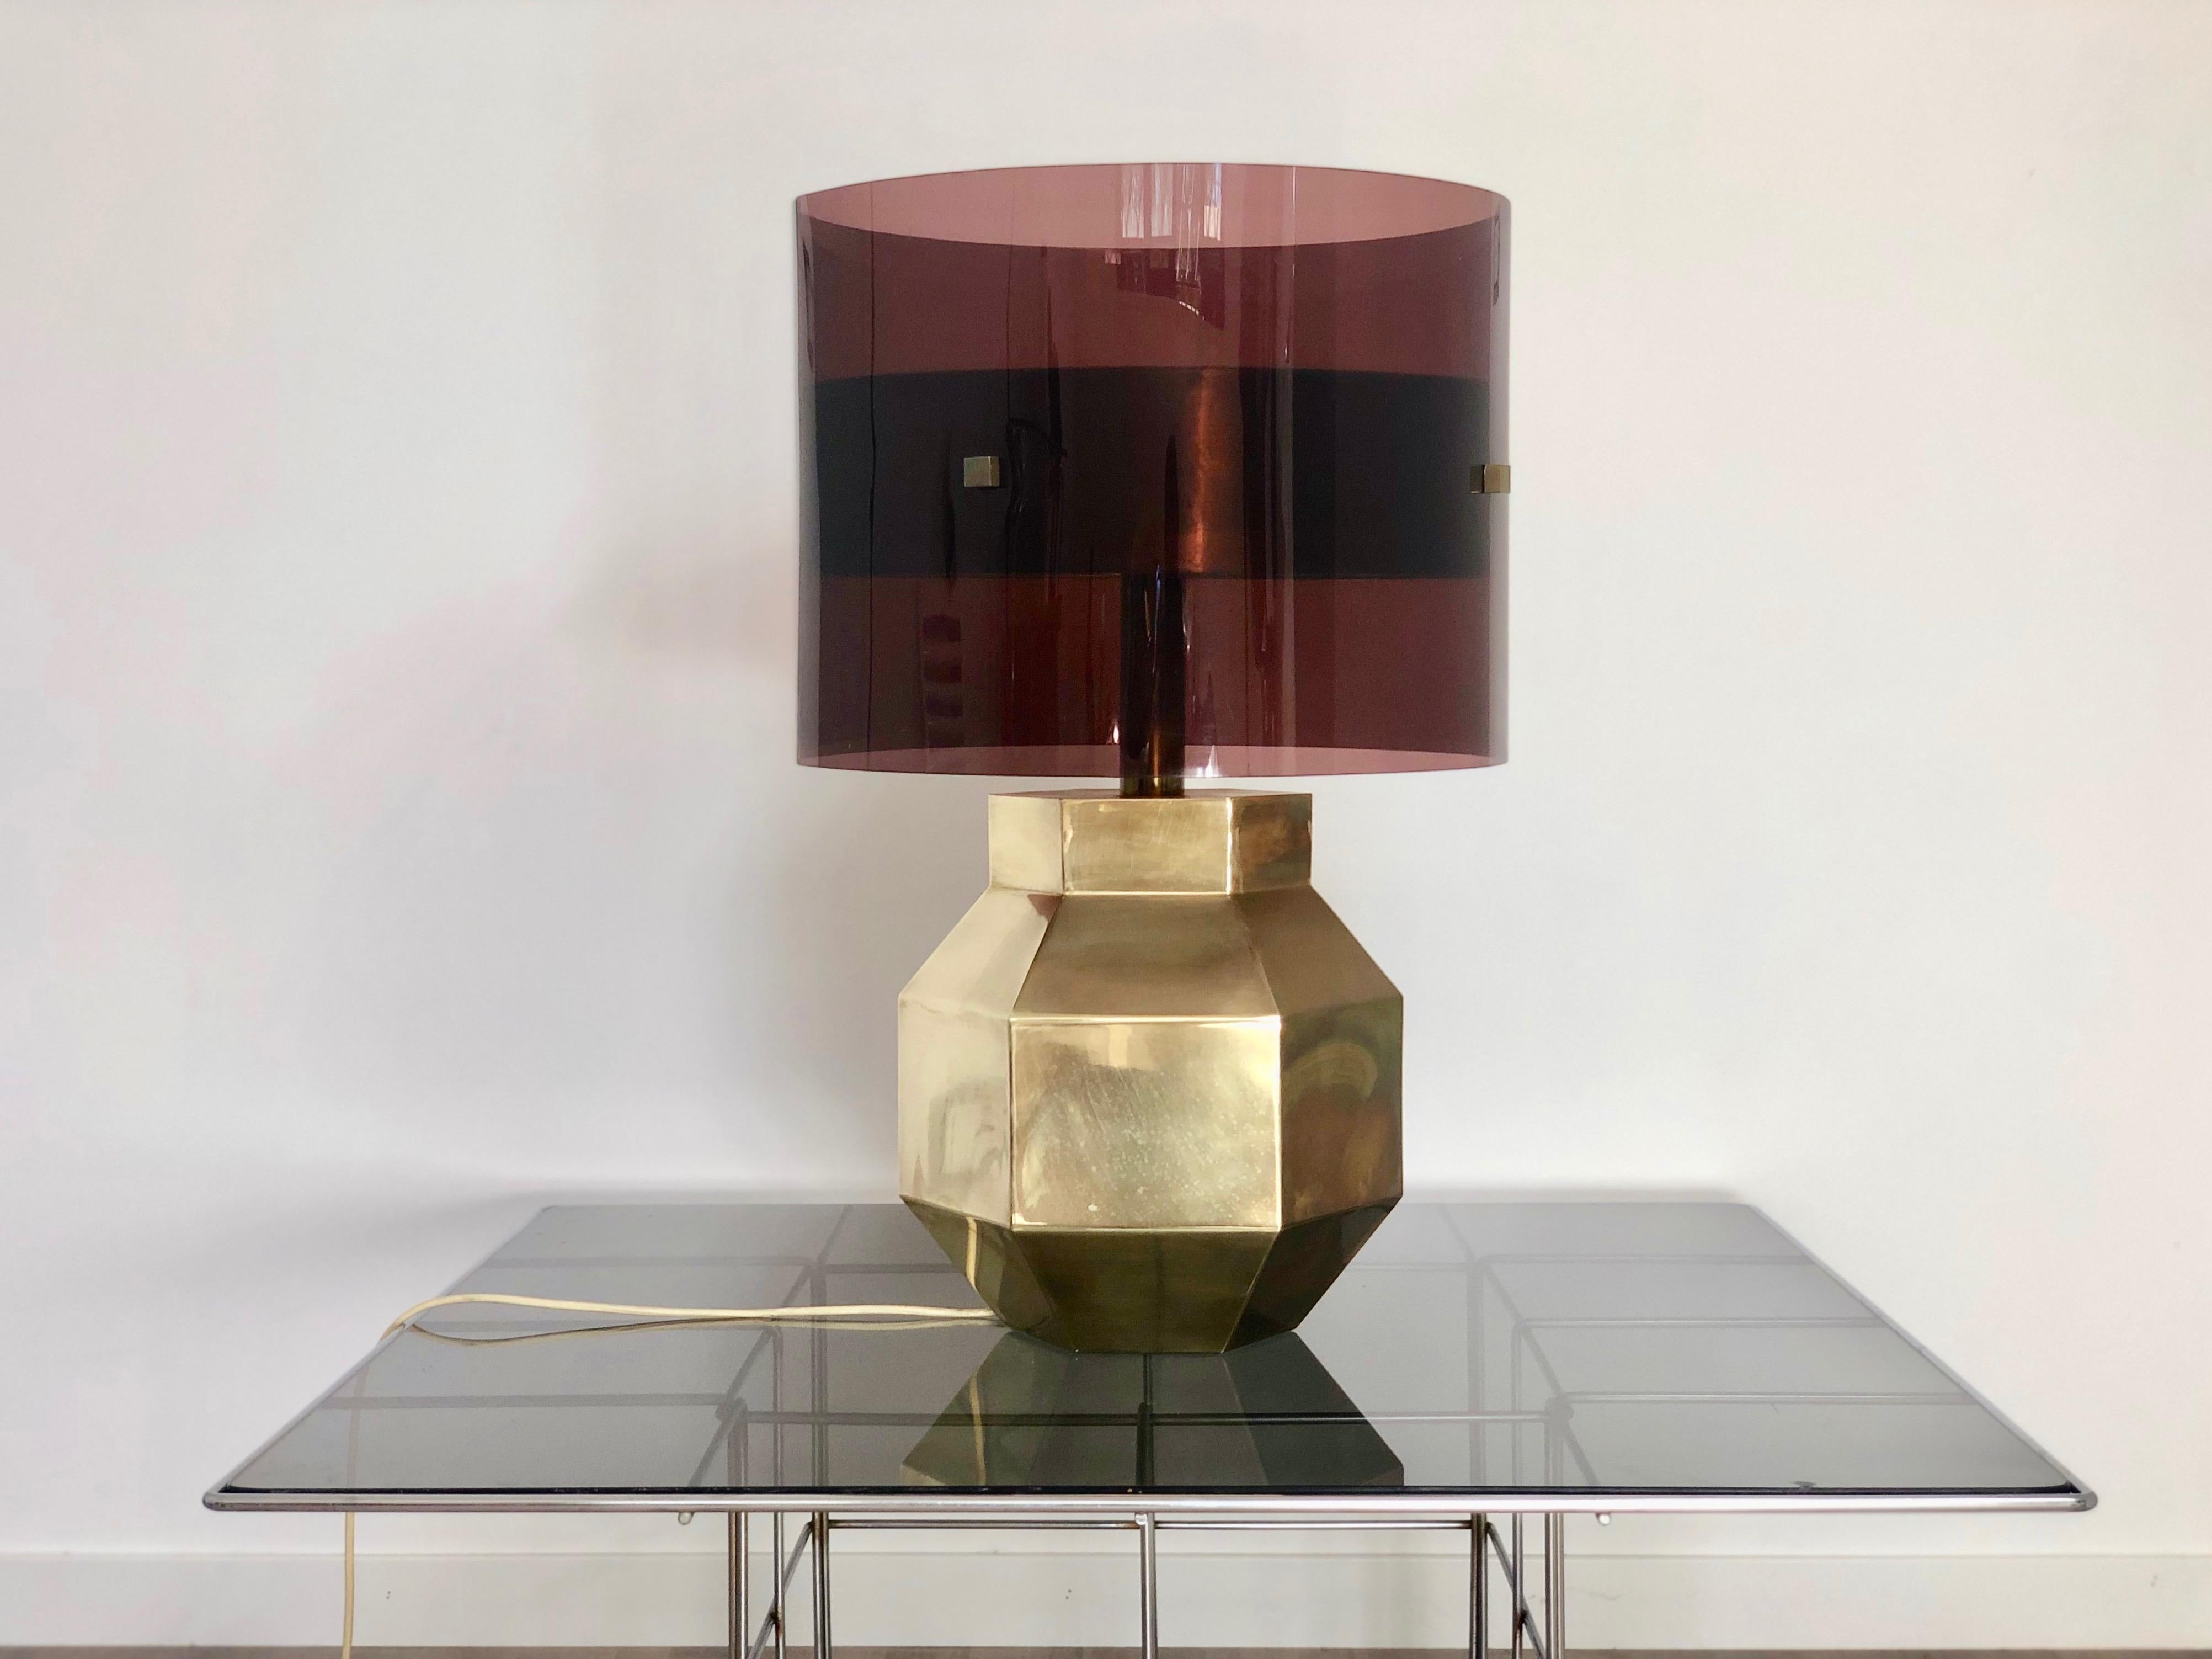 Table lamp featuring a brass base in the shape of a hexagonal solid and a lampshade in Lucite. Two lights can be turn on. Italian piece, circa 1970.